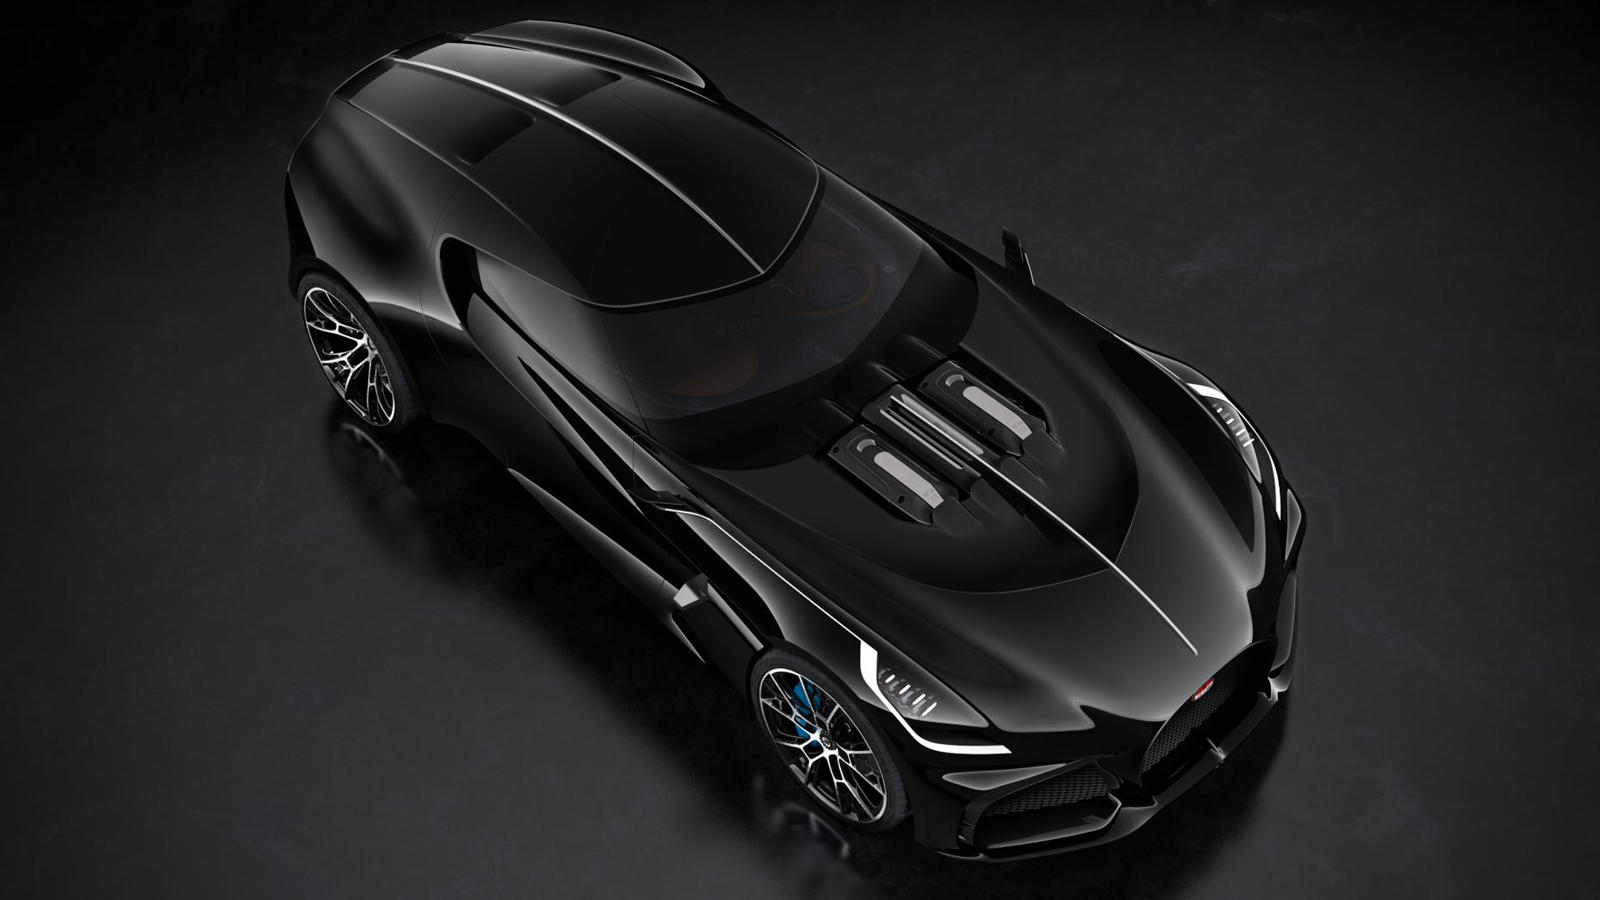 Top-down view of the Bugatti Rembrandt showing it's Divo-style headlights.